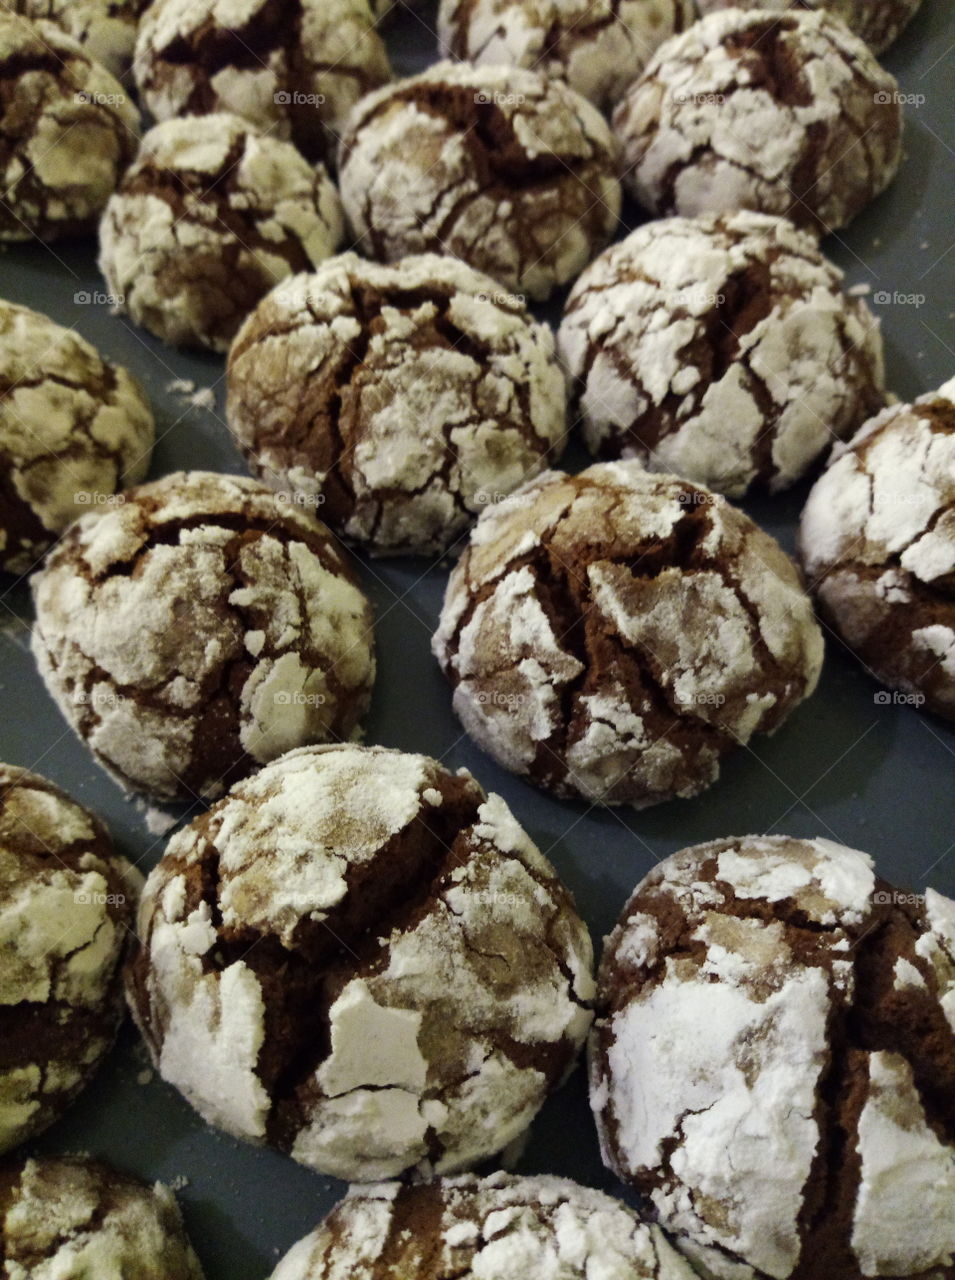 small home baked chocolate cookies with cracks